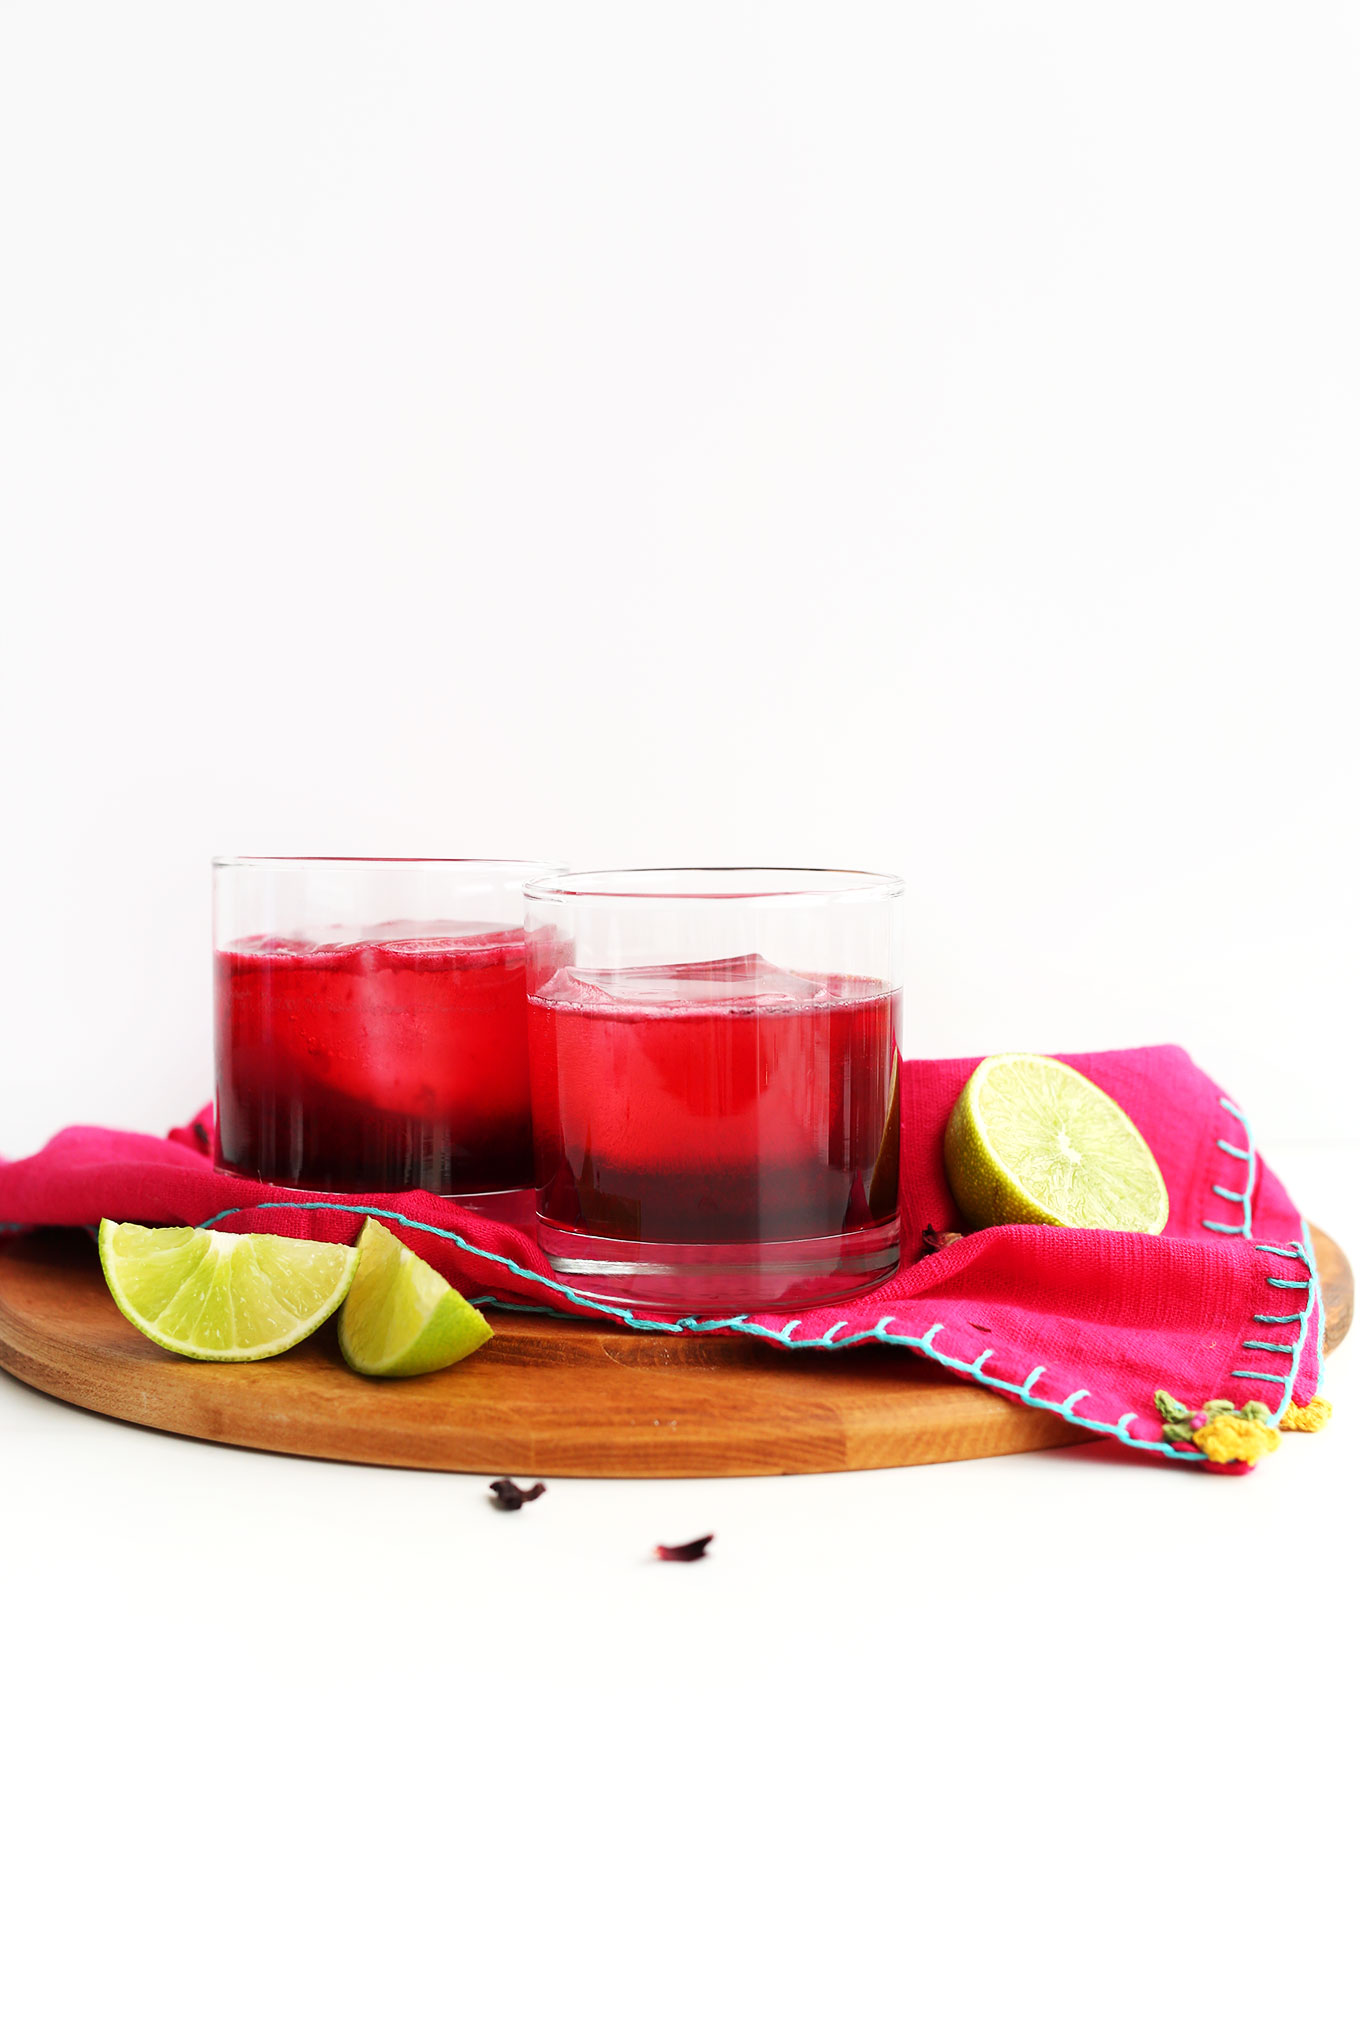 Two glasses of our Hibiscus Margarita recipe with limes